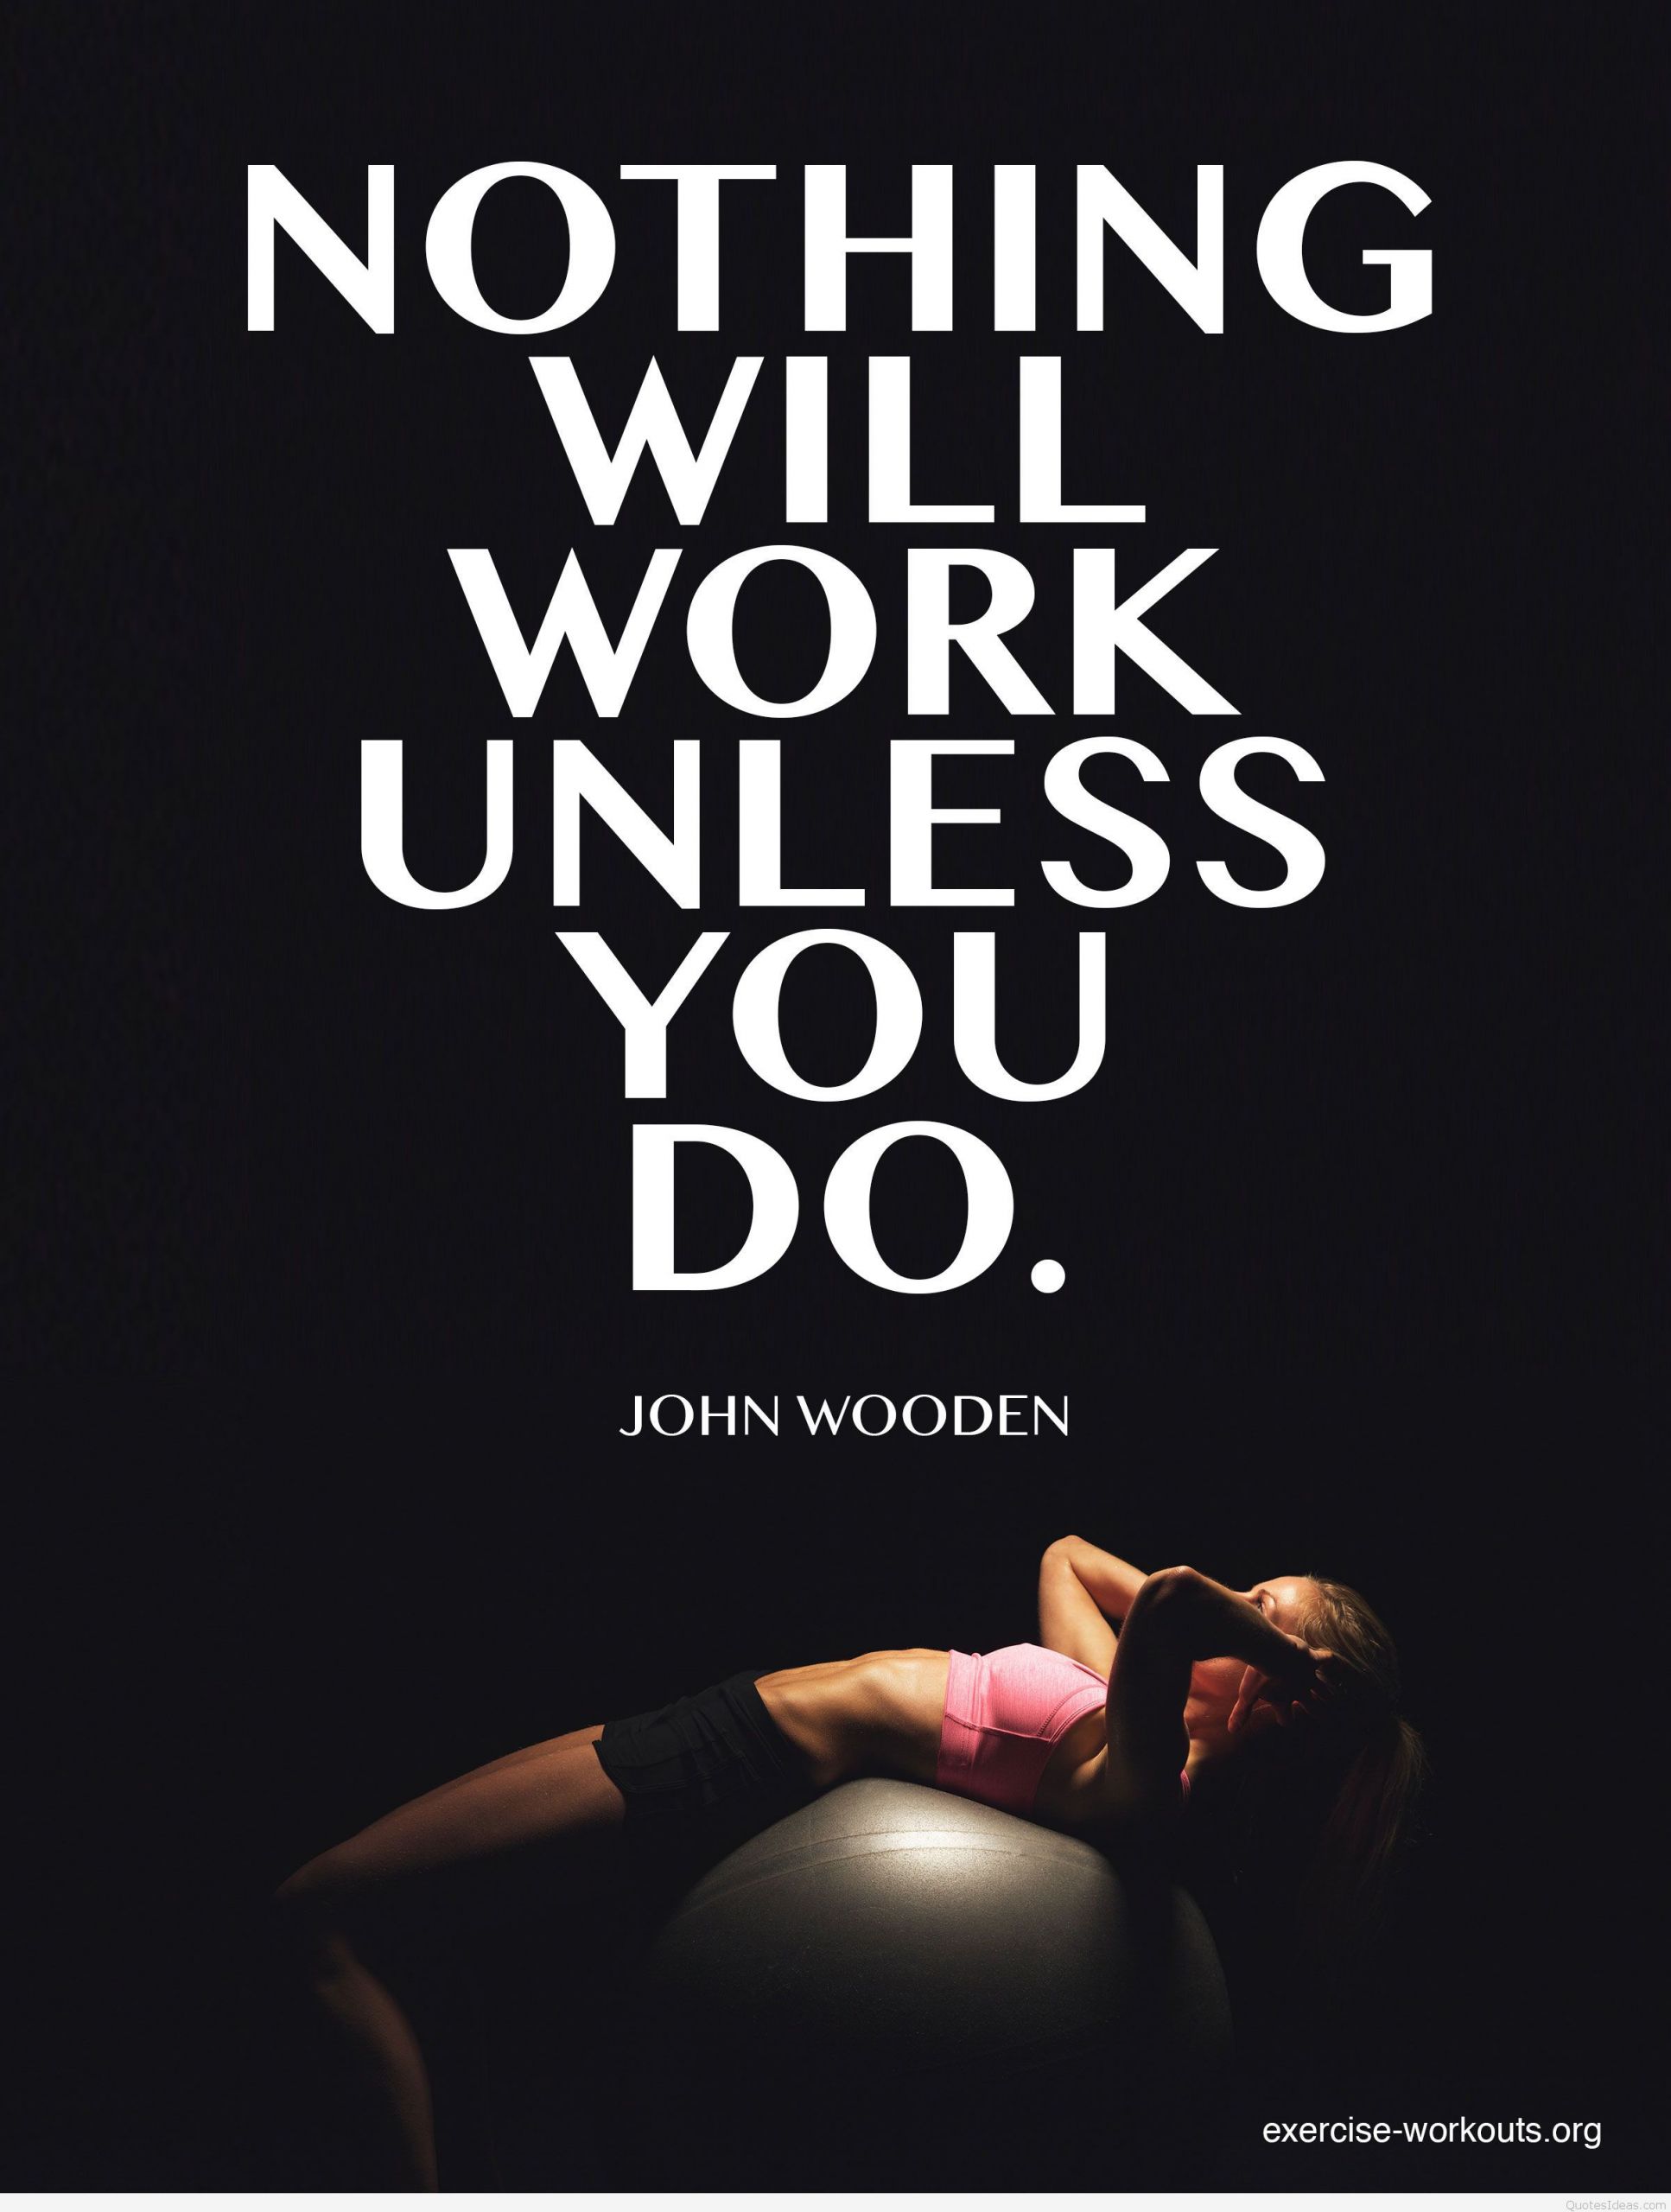 Exercise Inspirational Quote
 Motivational fitness quotes pictures and sayings